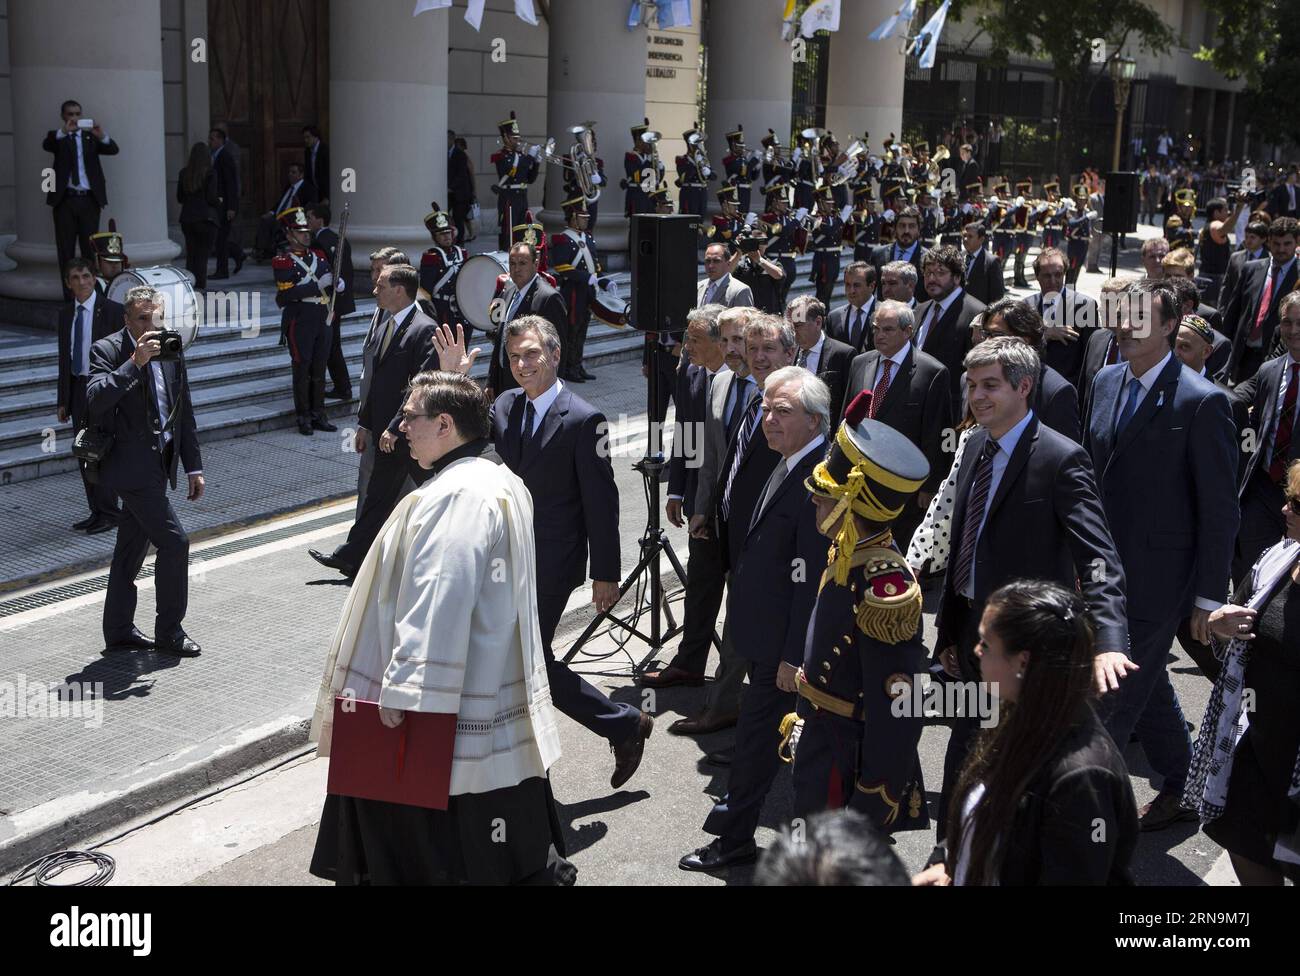 (151211) -- BUENOS AIRES, Dec. 11, 2015 -- Argentina s President Mauricio Macri (C) waves while walking on May Avenue with his Cabinet to participate in the Tedeum at the Metropolitan Cathedral in Buenos Aires, capital of Argentina, Dec. 11, 2015. According to local press, Mauricio Macri Friday attended the traditional religious service at the Metropolital Cathedral, the day after his pesidential inauguration. Martin Zabala) (jg) (fnc) ARGENTINA-BUENOS AIRES-POLITICS-PRESIDENT e MARTINxZABALA PUBLICATIONxNOTxINxCHN   151211 Buenos Aires DEC 11 2015 Argentina S President Mauricio Macri C Waves Stock Photo